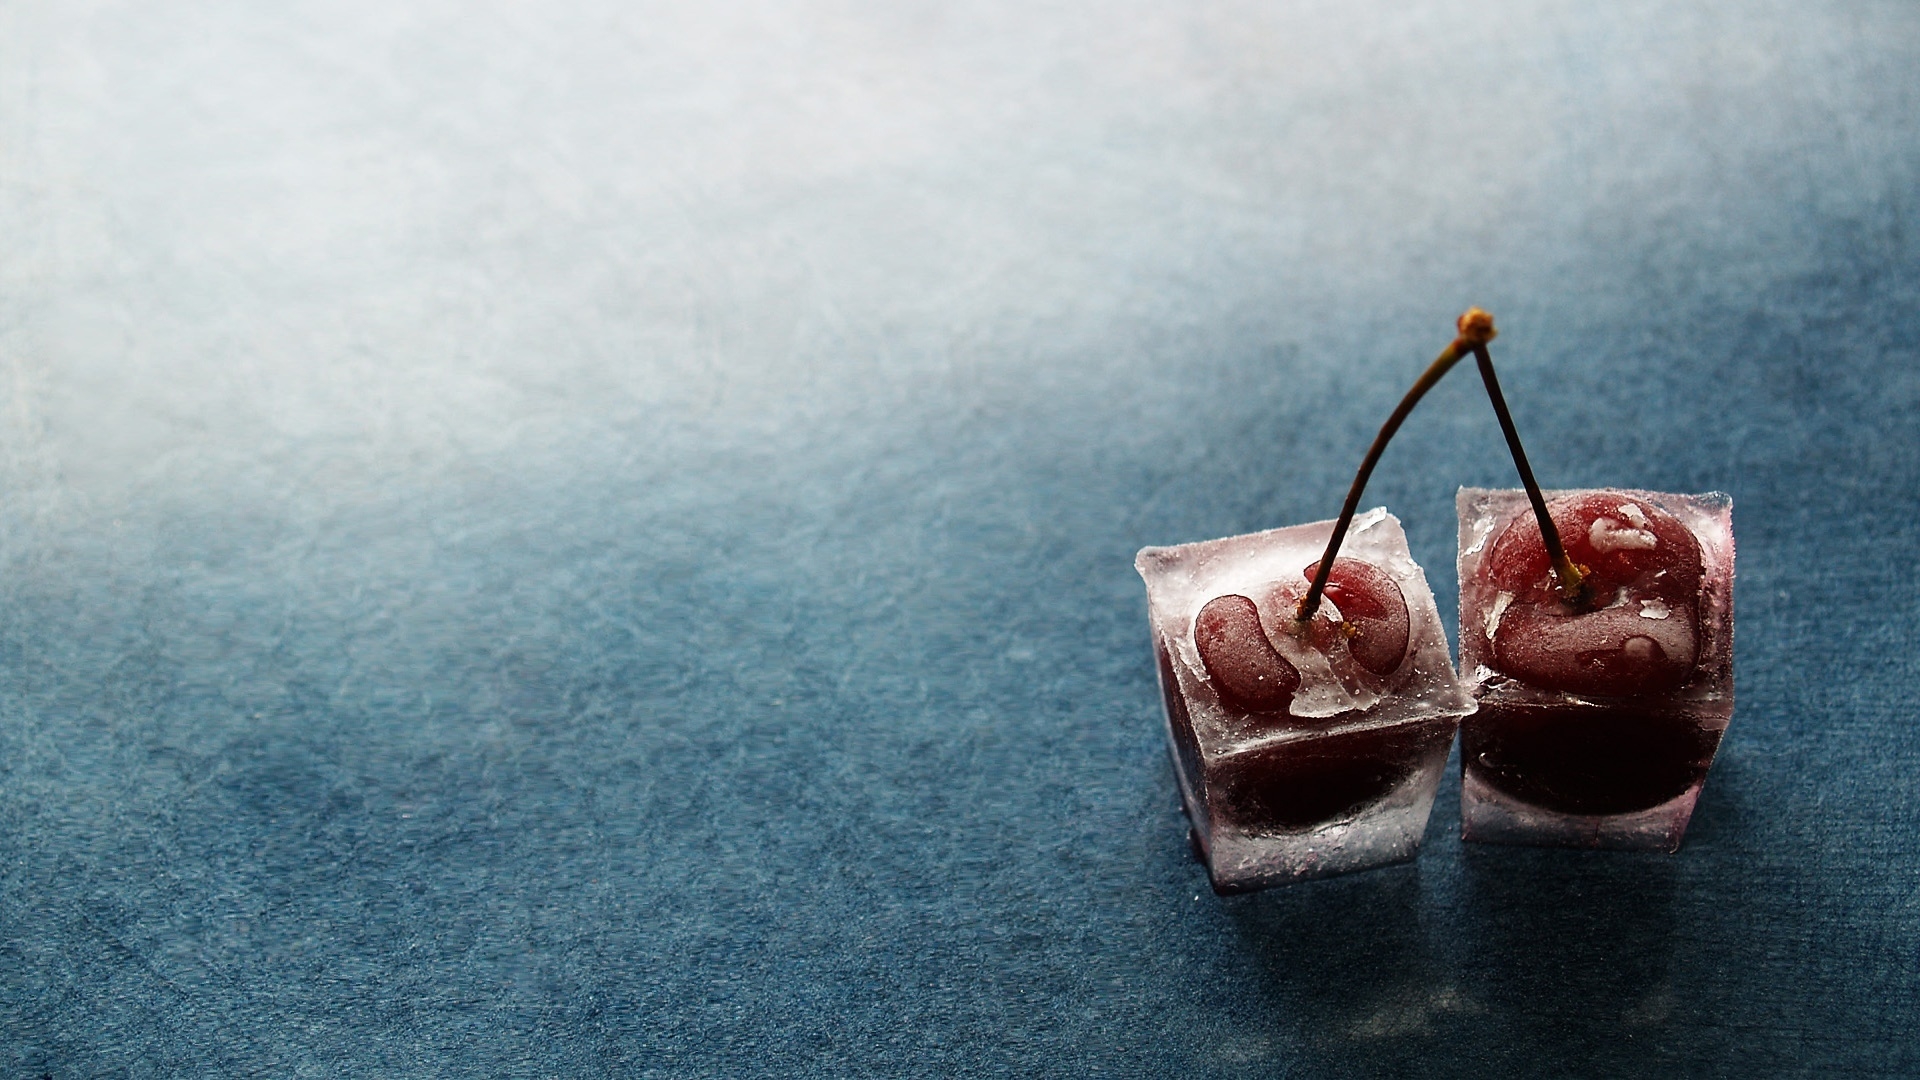 Cherries in Ice for 1920 x 1080 HDTV 1080p resolution